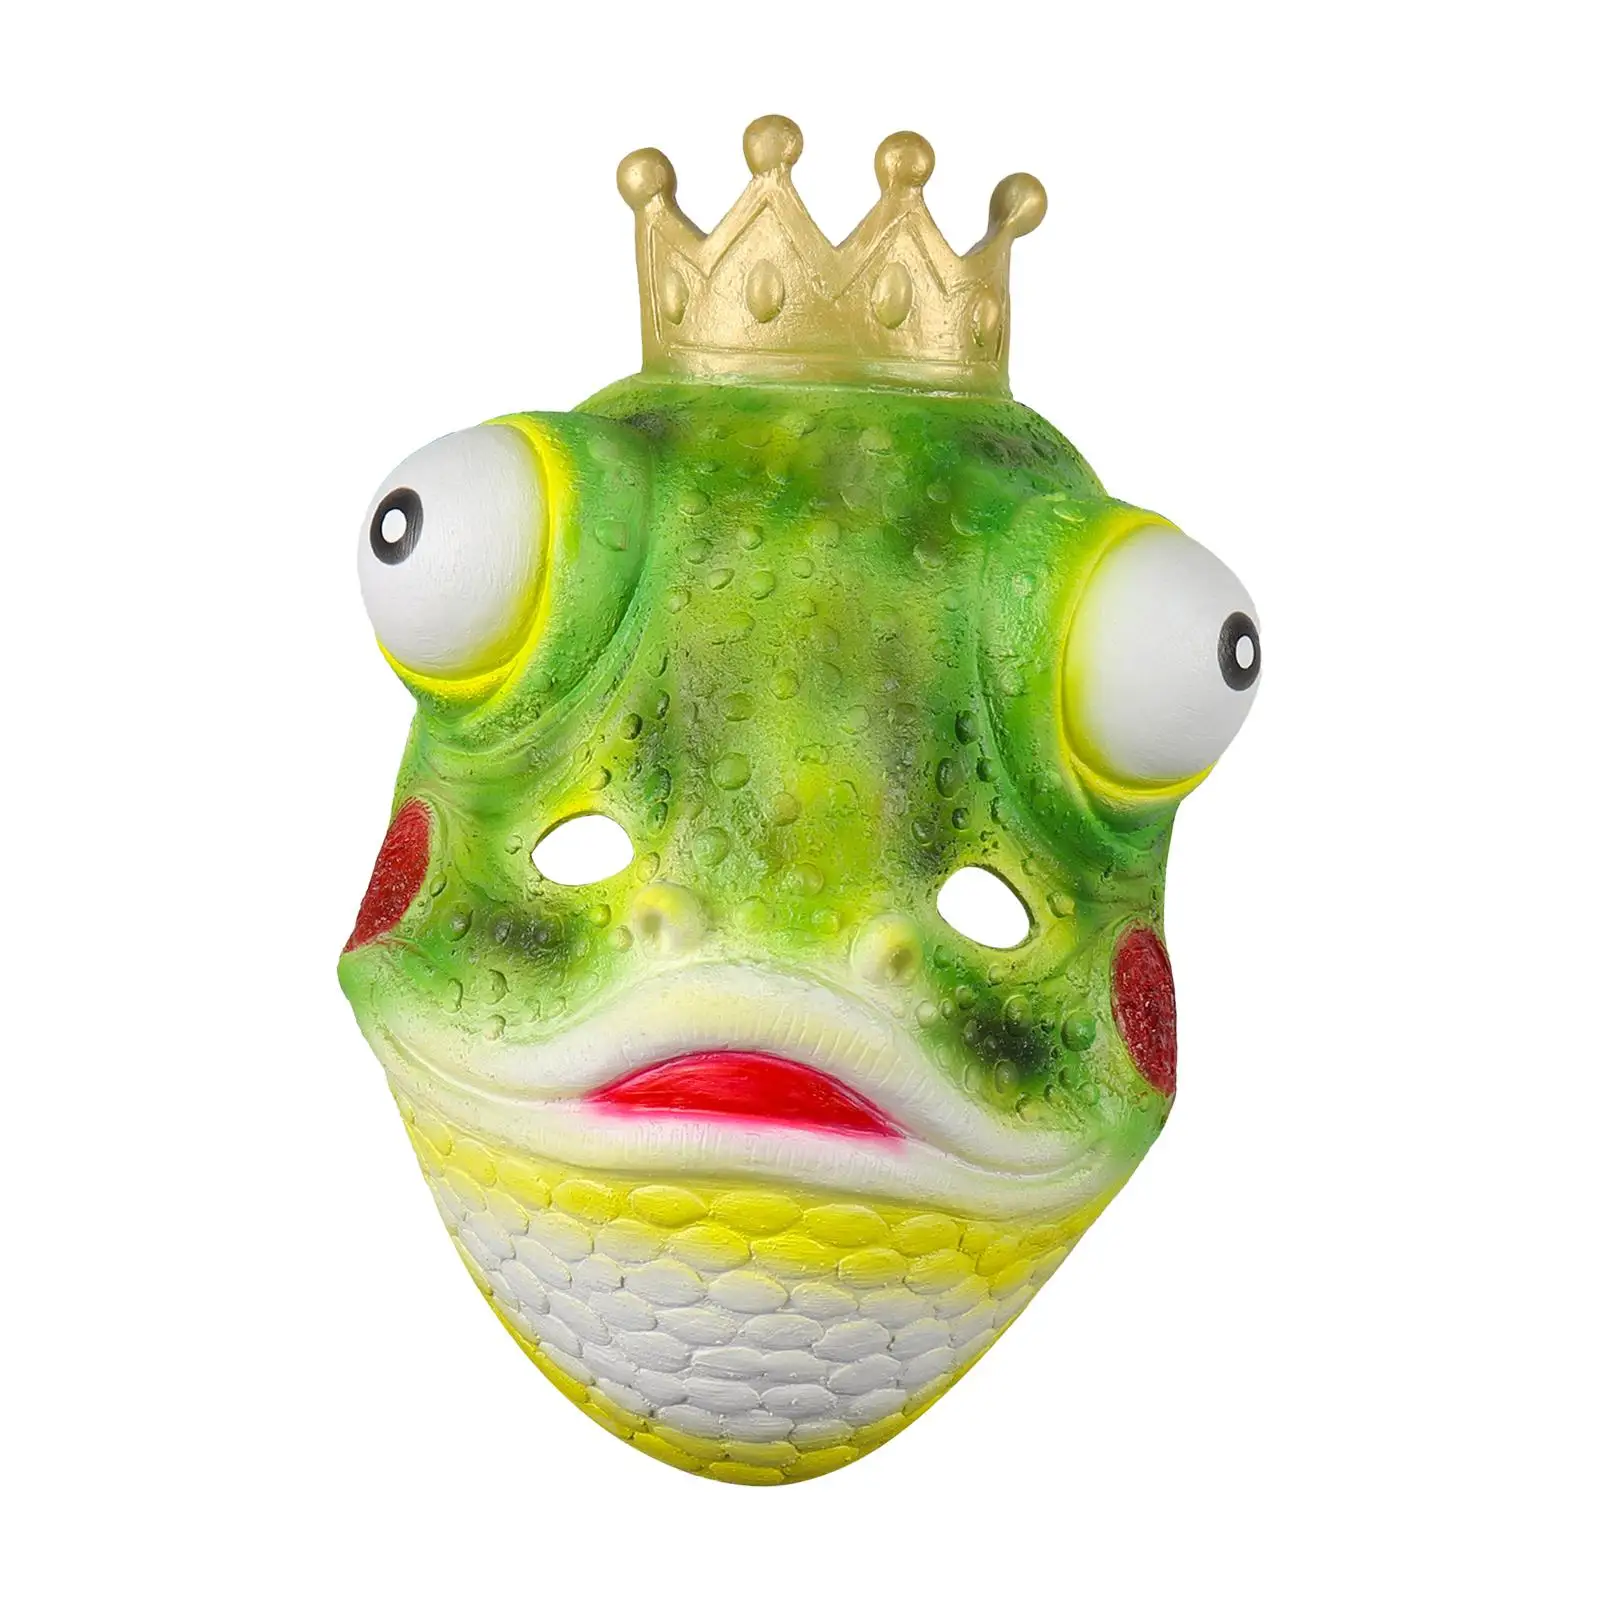 Frog  Mask Headgear Novelty Face Mask Fancy Dress Cosplay  Mask for Night Club Prom Halloween Party Festival